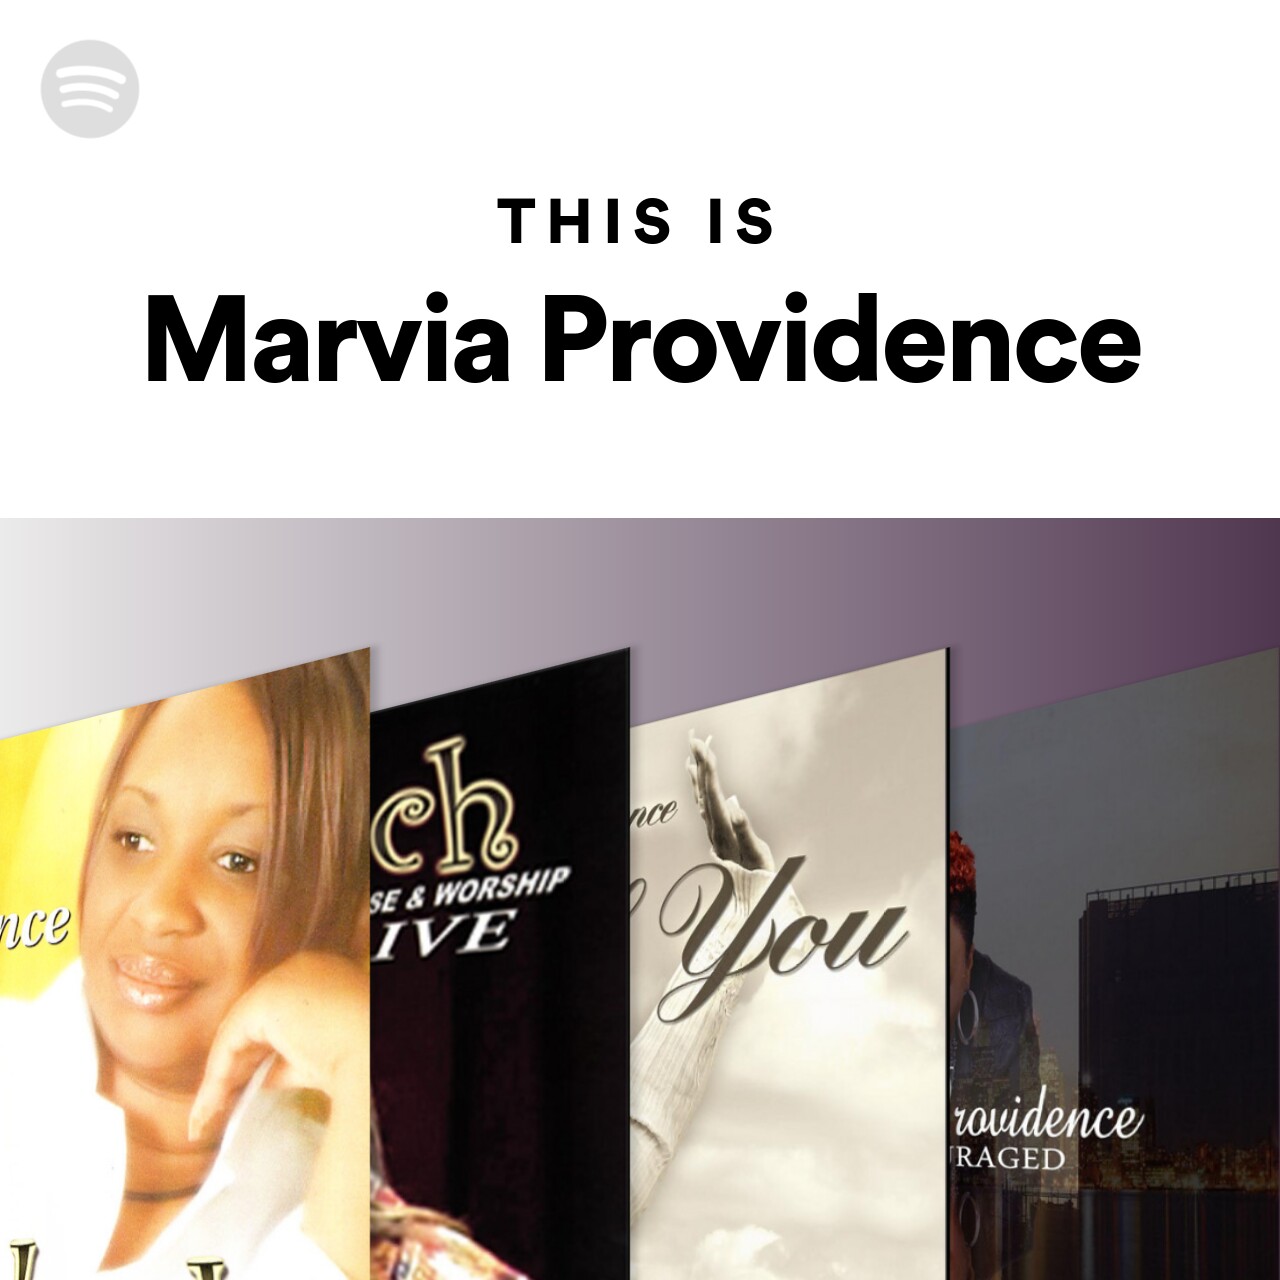 This Is Marvia Providence